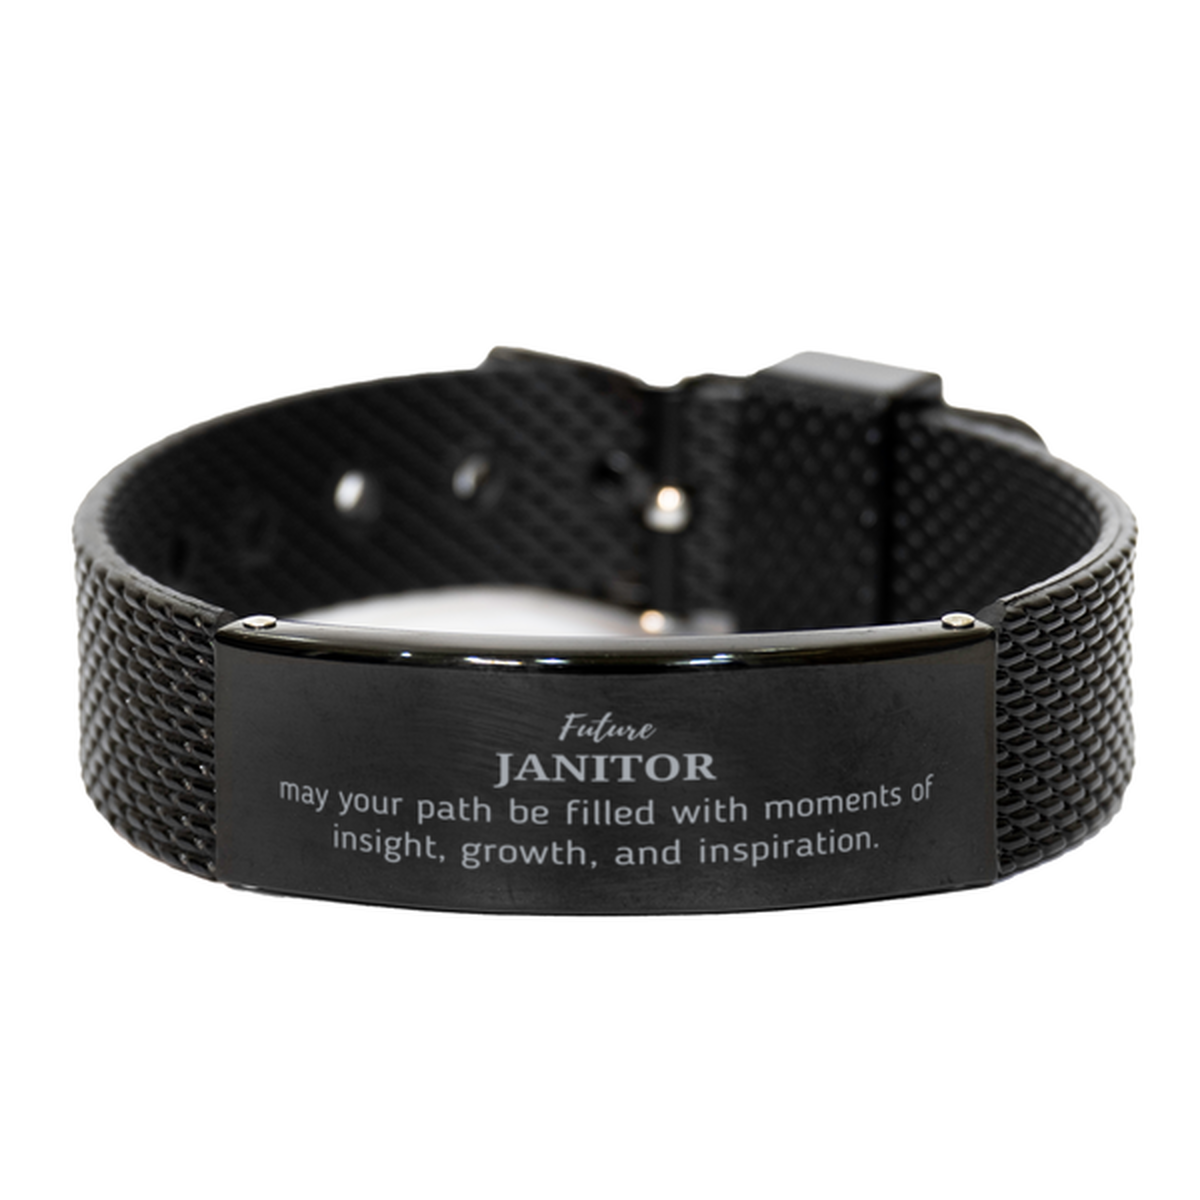 Future Janitor Gifts, May your path be filled with moments of insight, Graduation Gifts for New Janitor, Christmas Unique Black Shark Mesh Bracelet For Men, Women, Friends